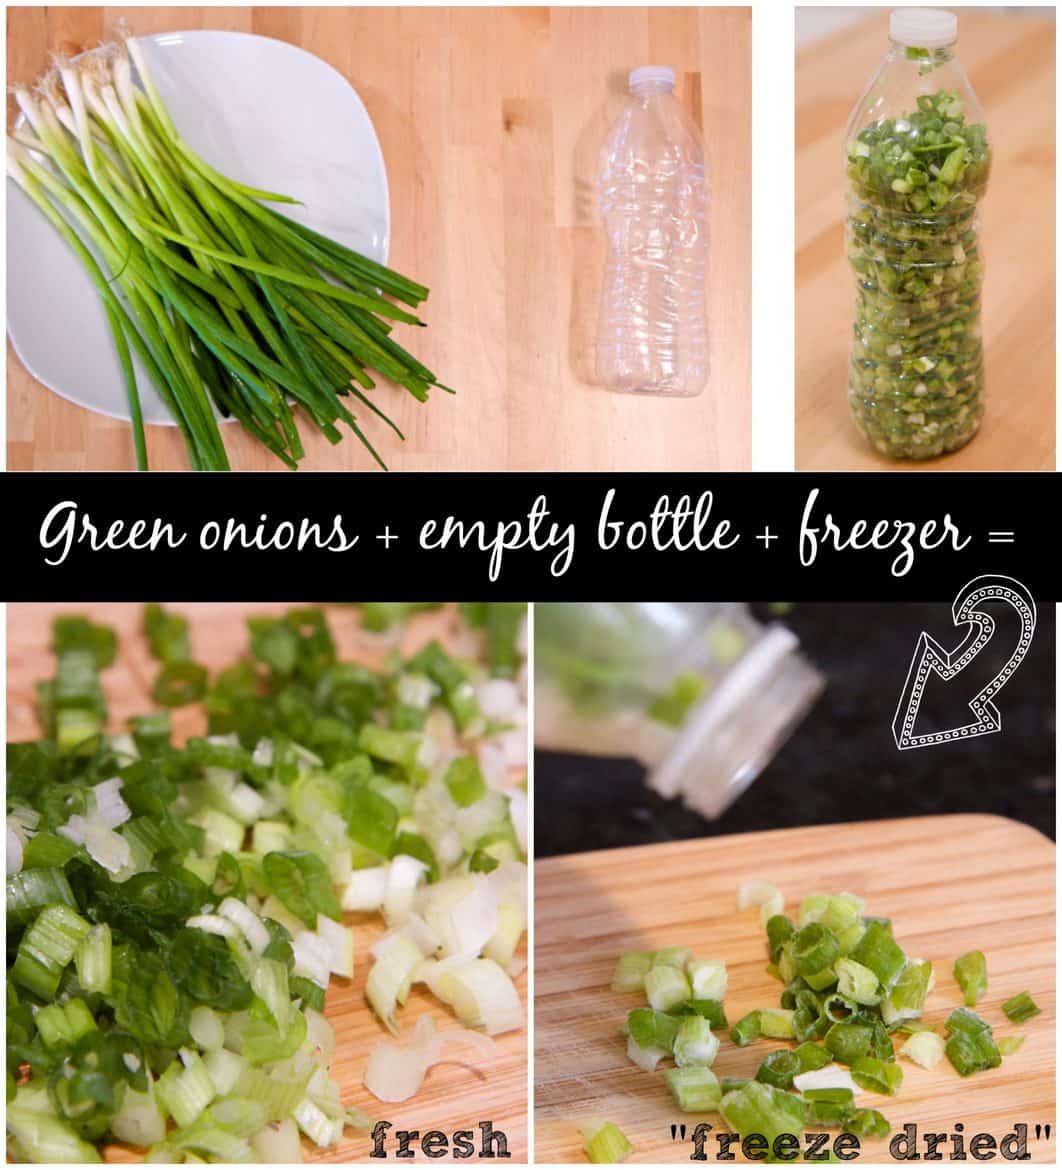 These two clever kitchen hacks make your fresh herbs useable later as easy recipe starters or "freeze dried" so you can use them months later! Less waste! 